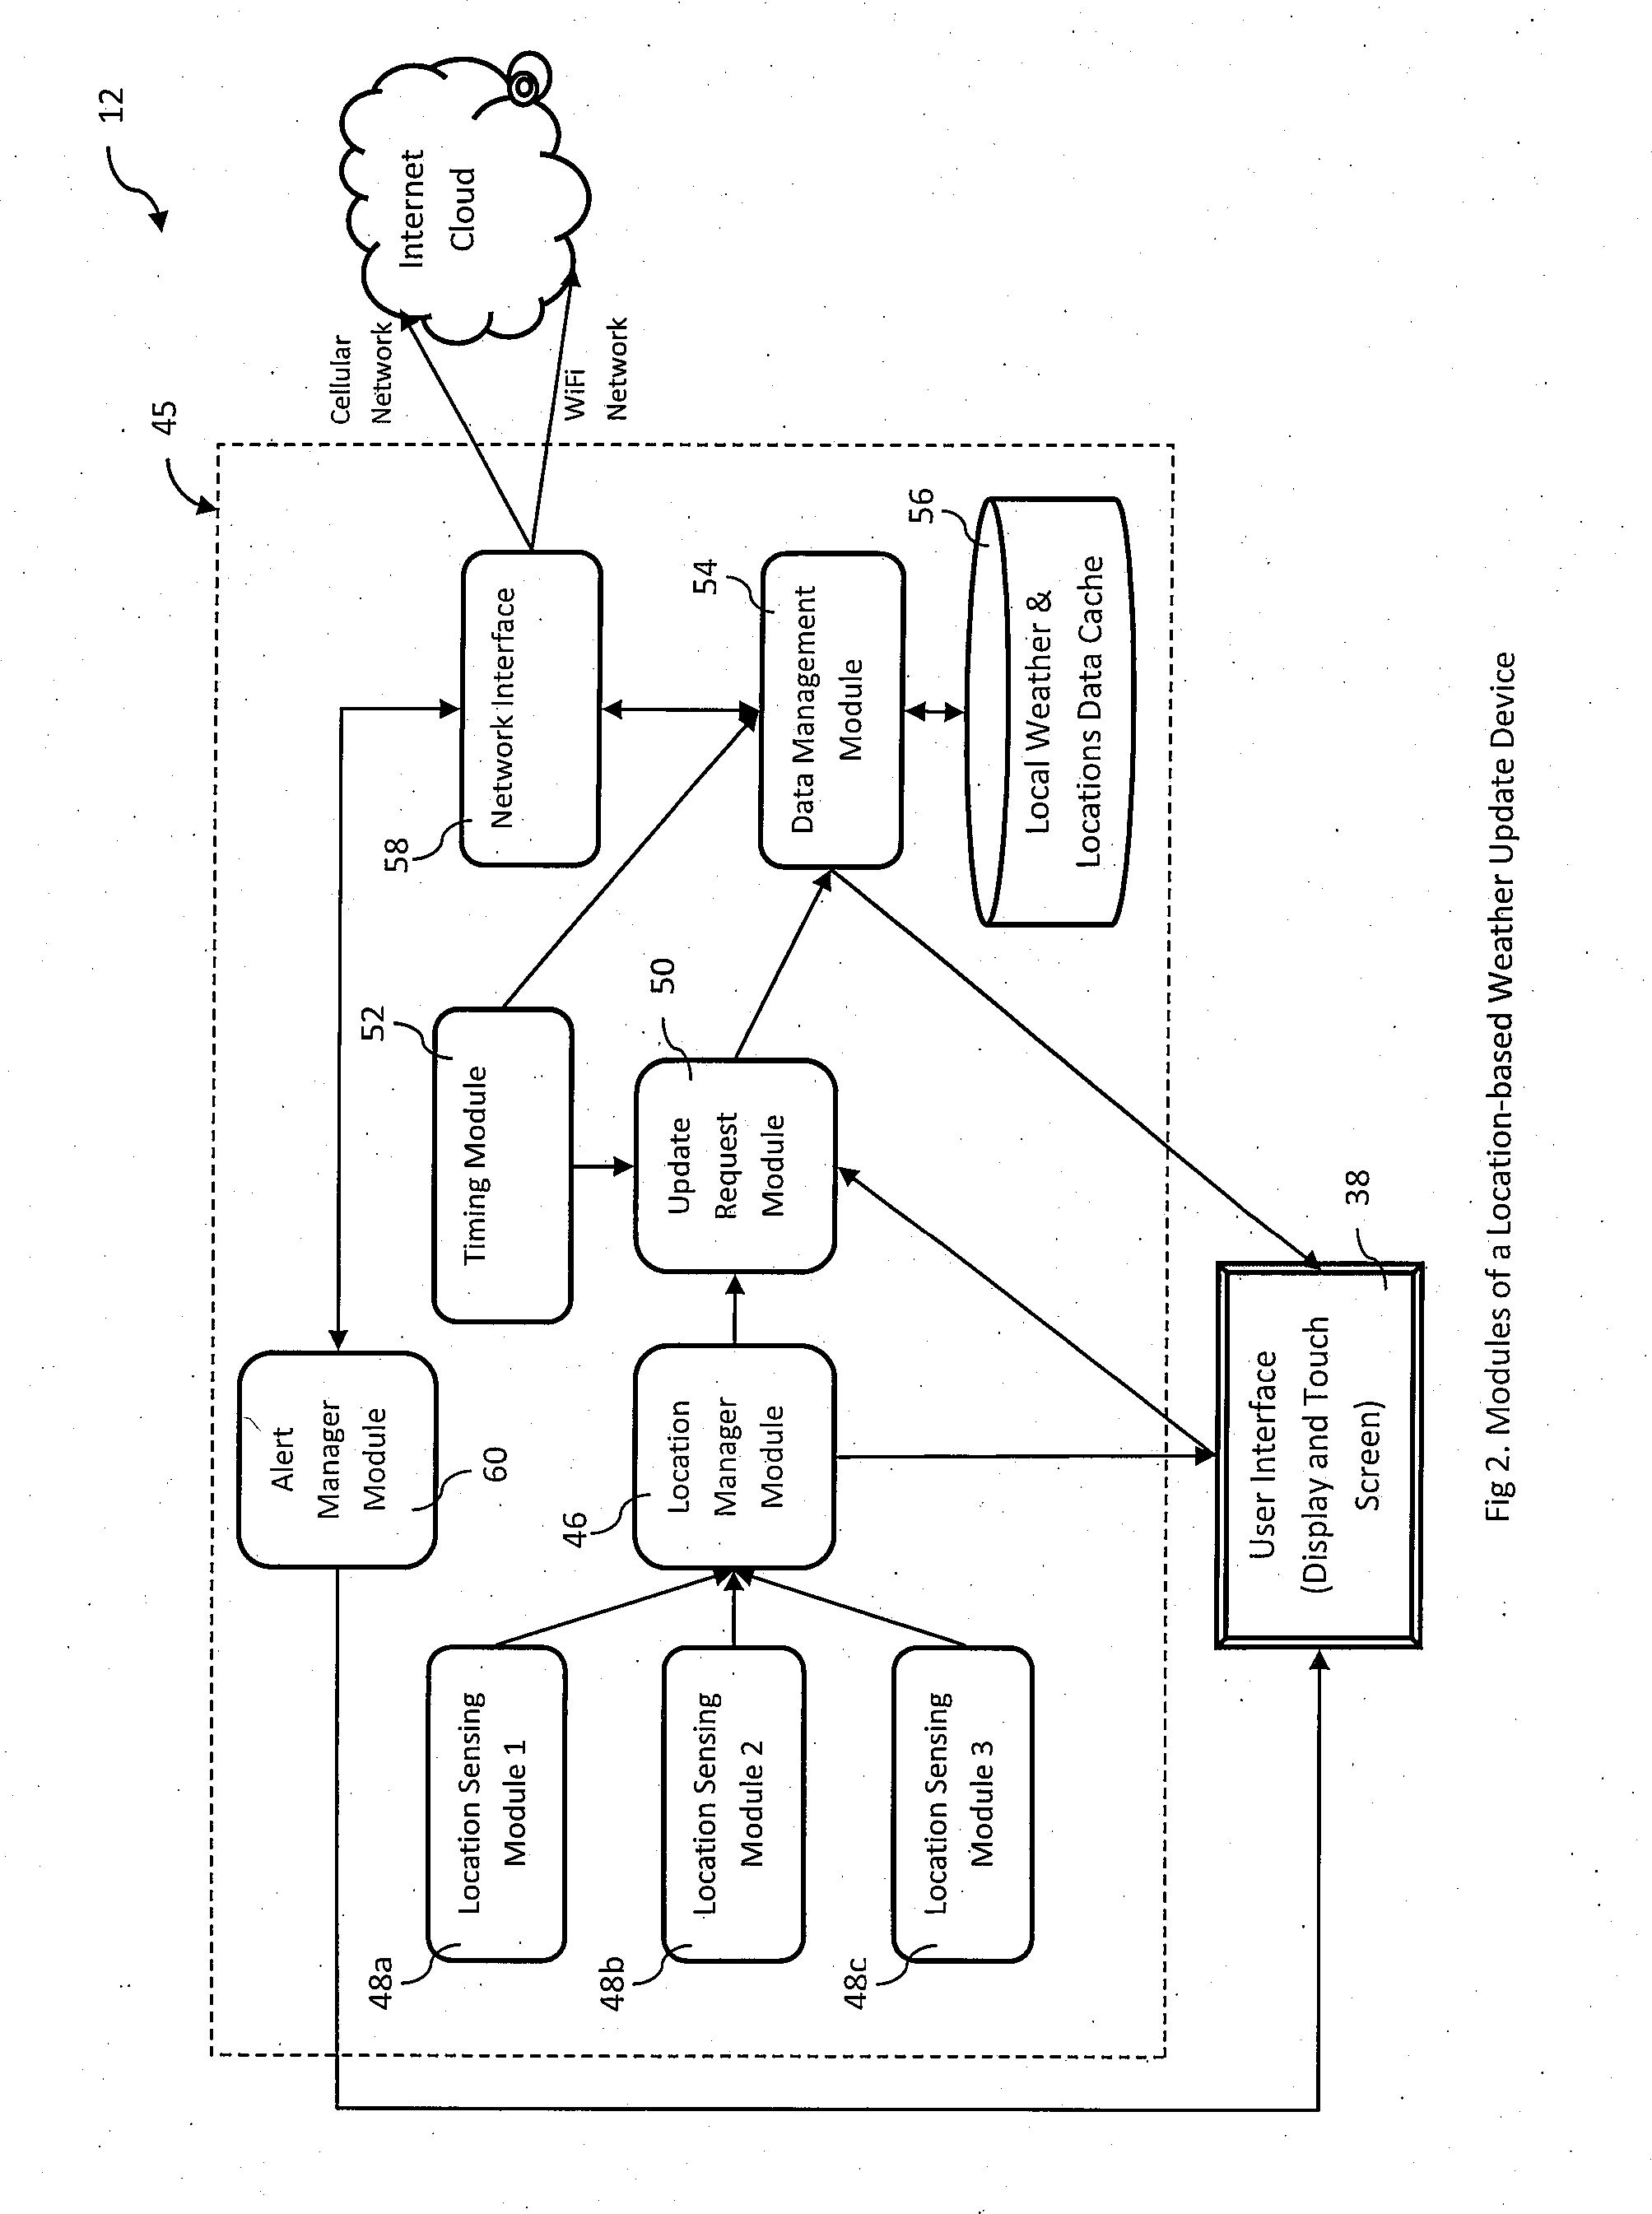 Location-based weather update system, method, and device